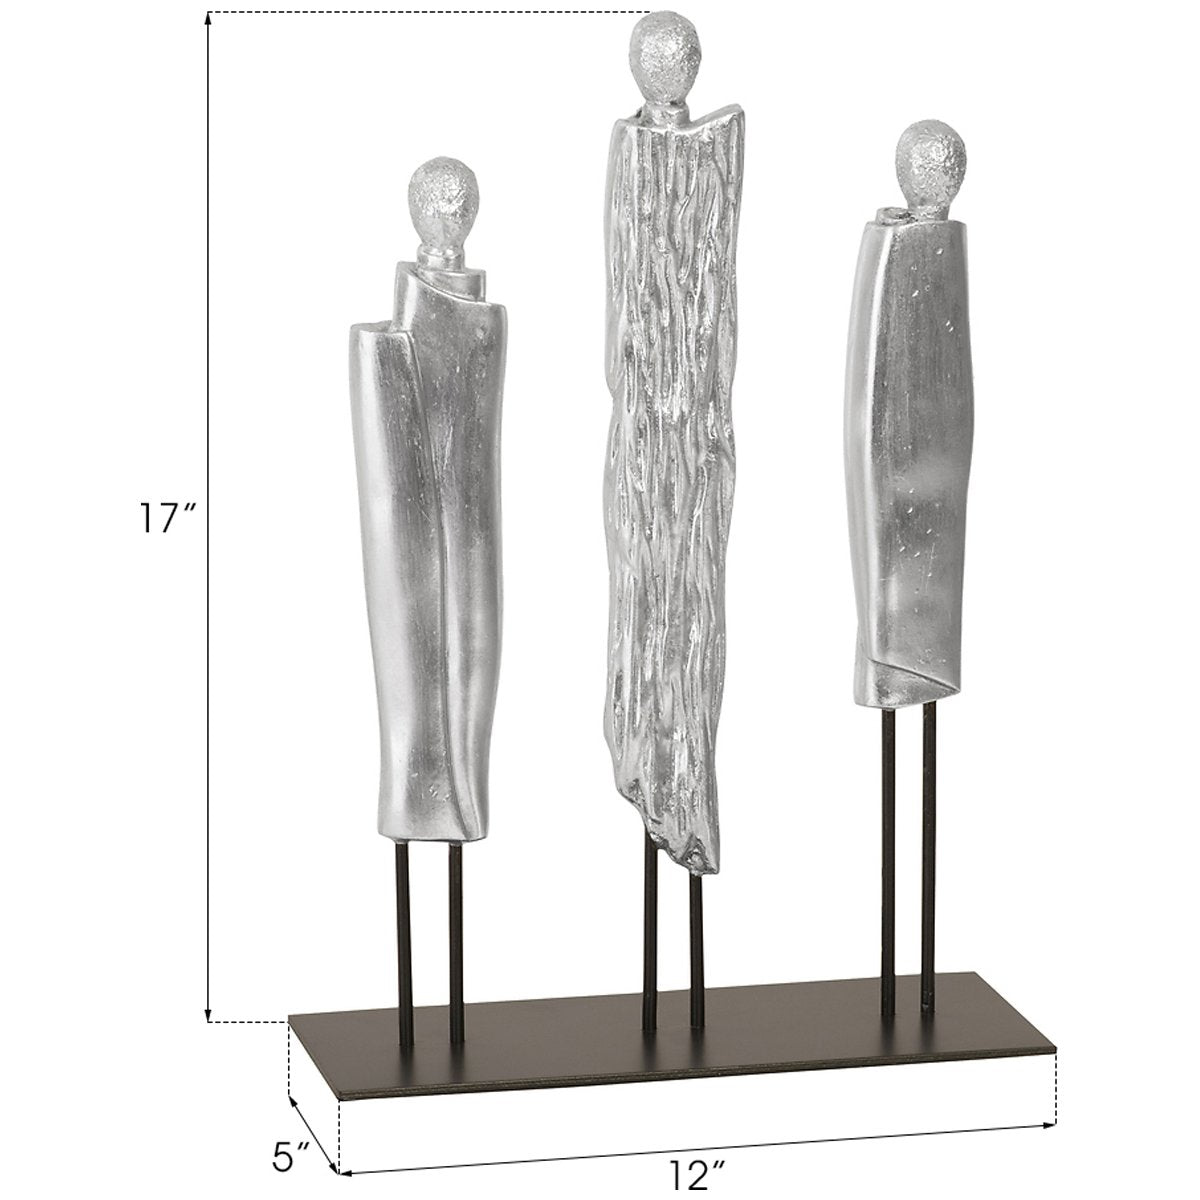 Phillips Collection Robed Monk Trio Sculpture